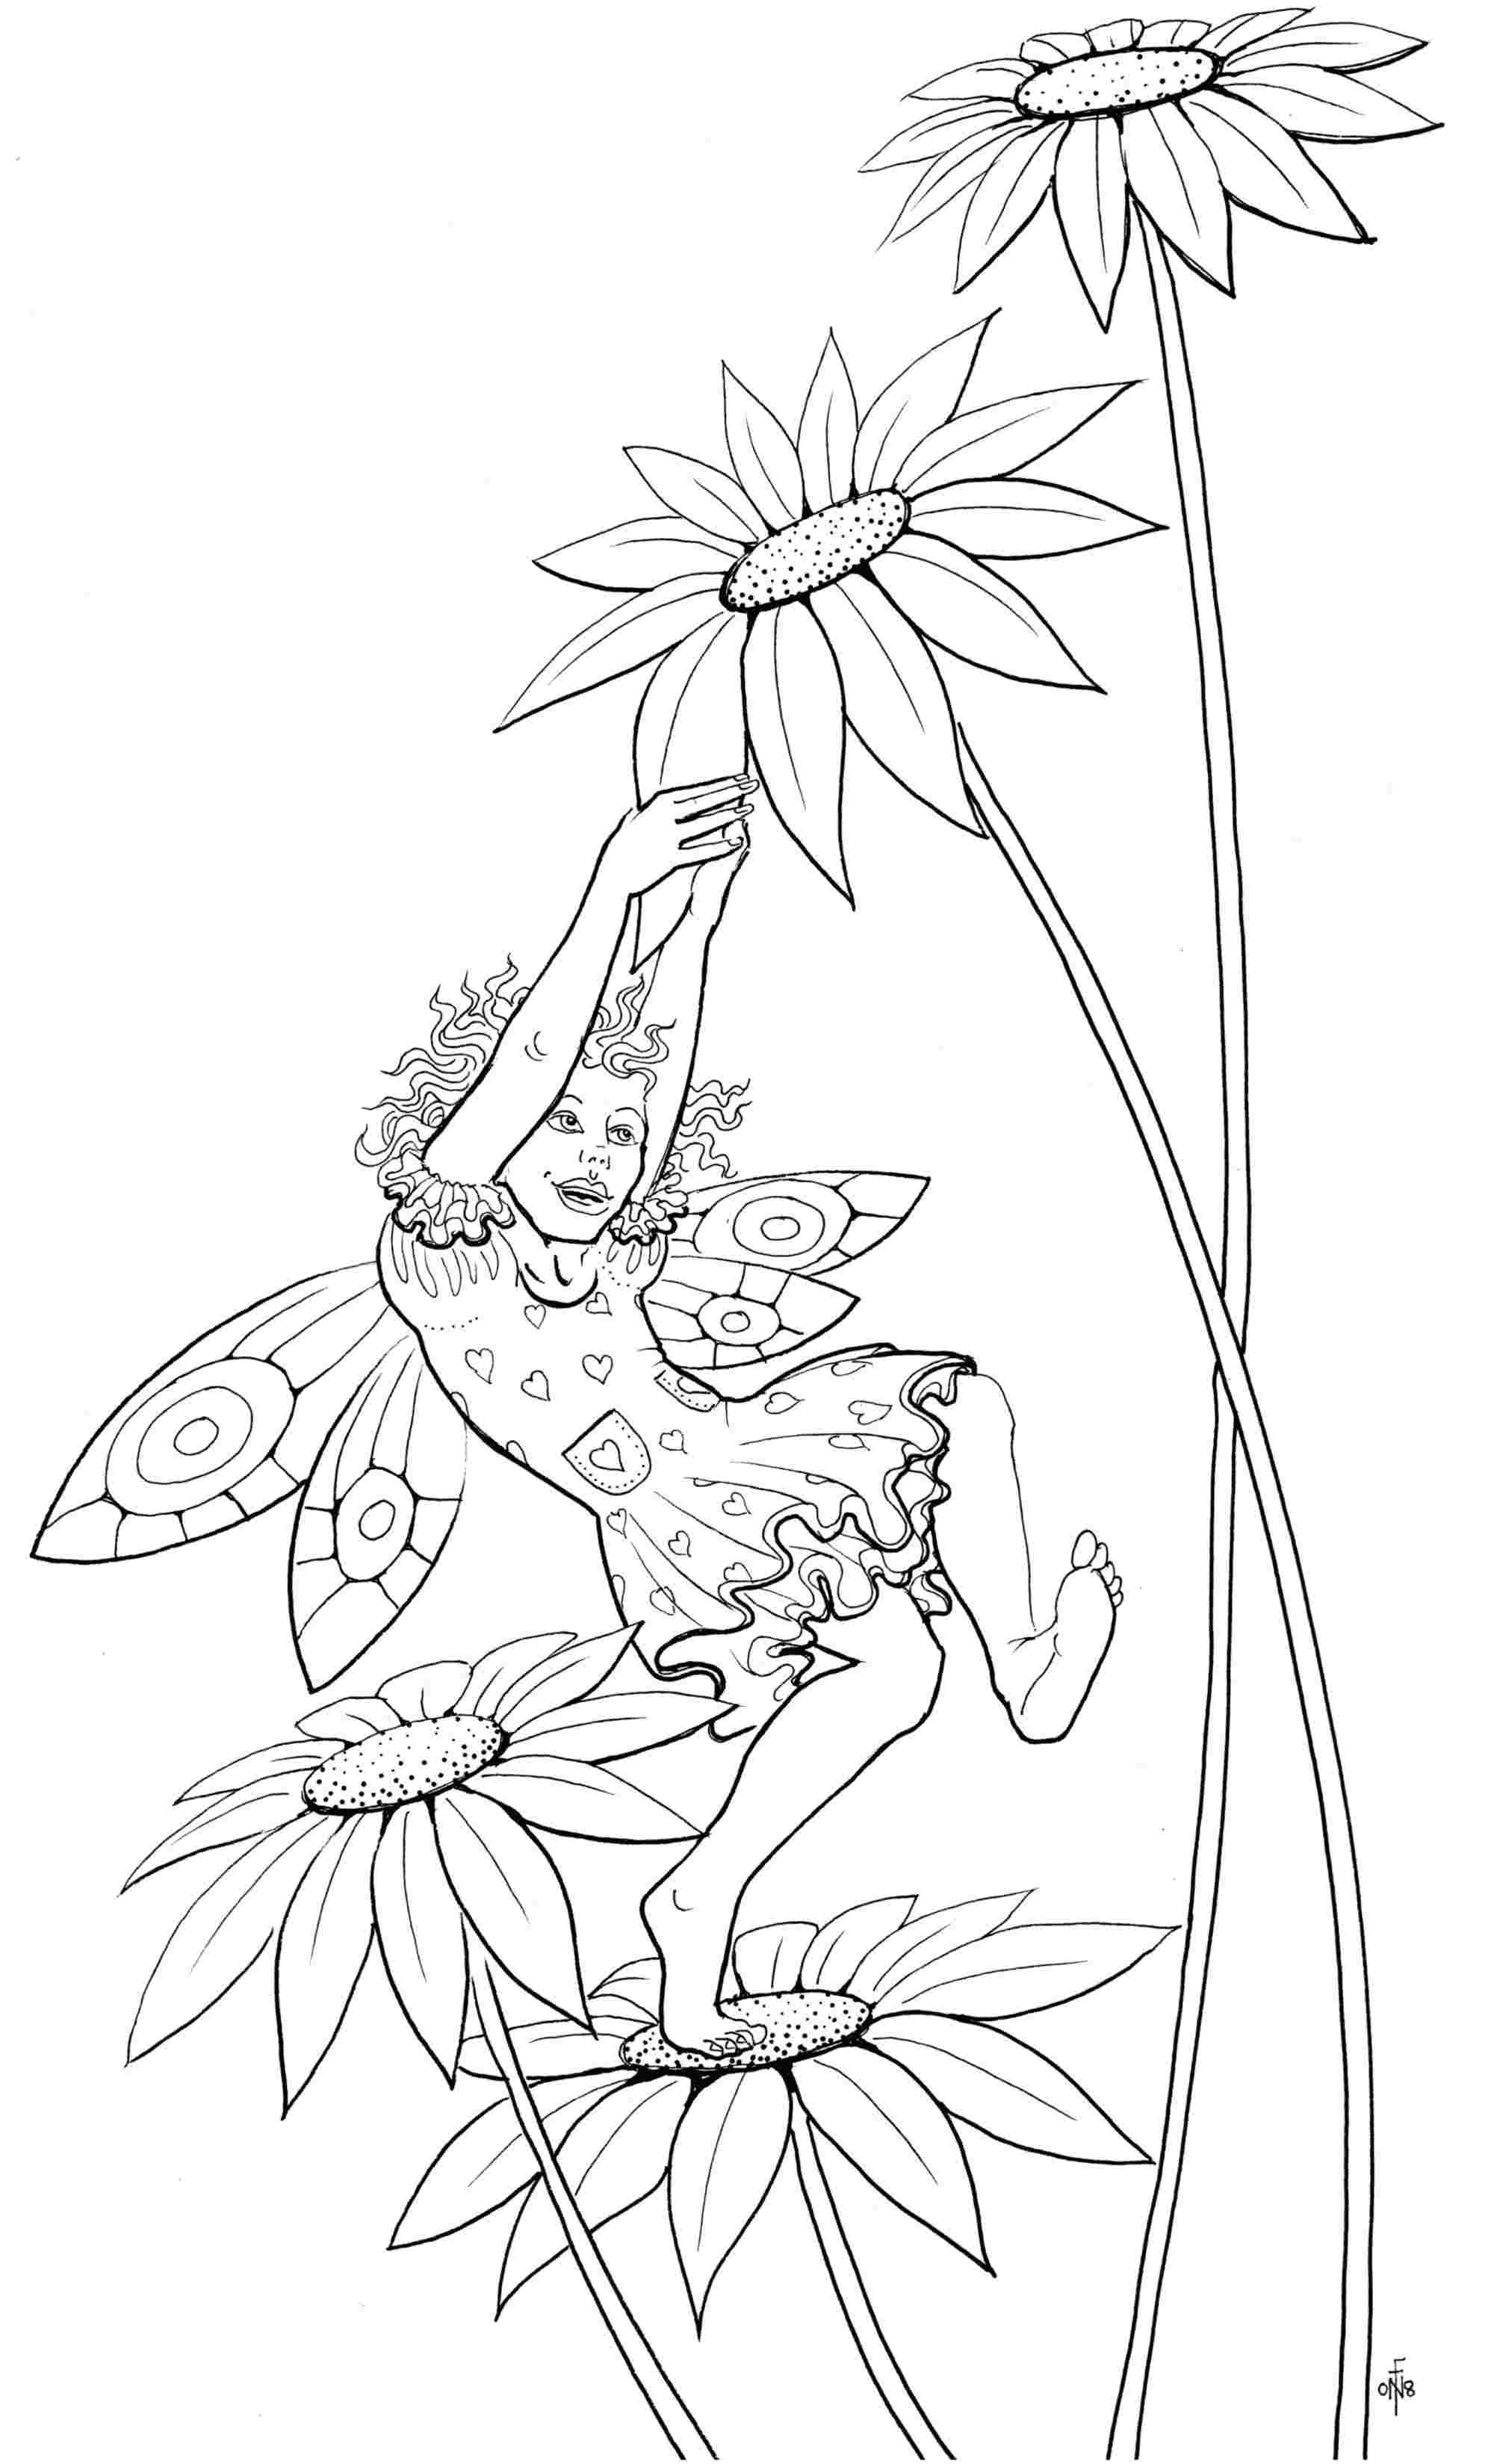 Pulling Daisies - colouring-in drawing - to download, right click and save, print out and colour in!